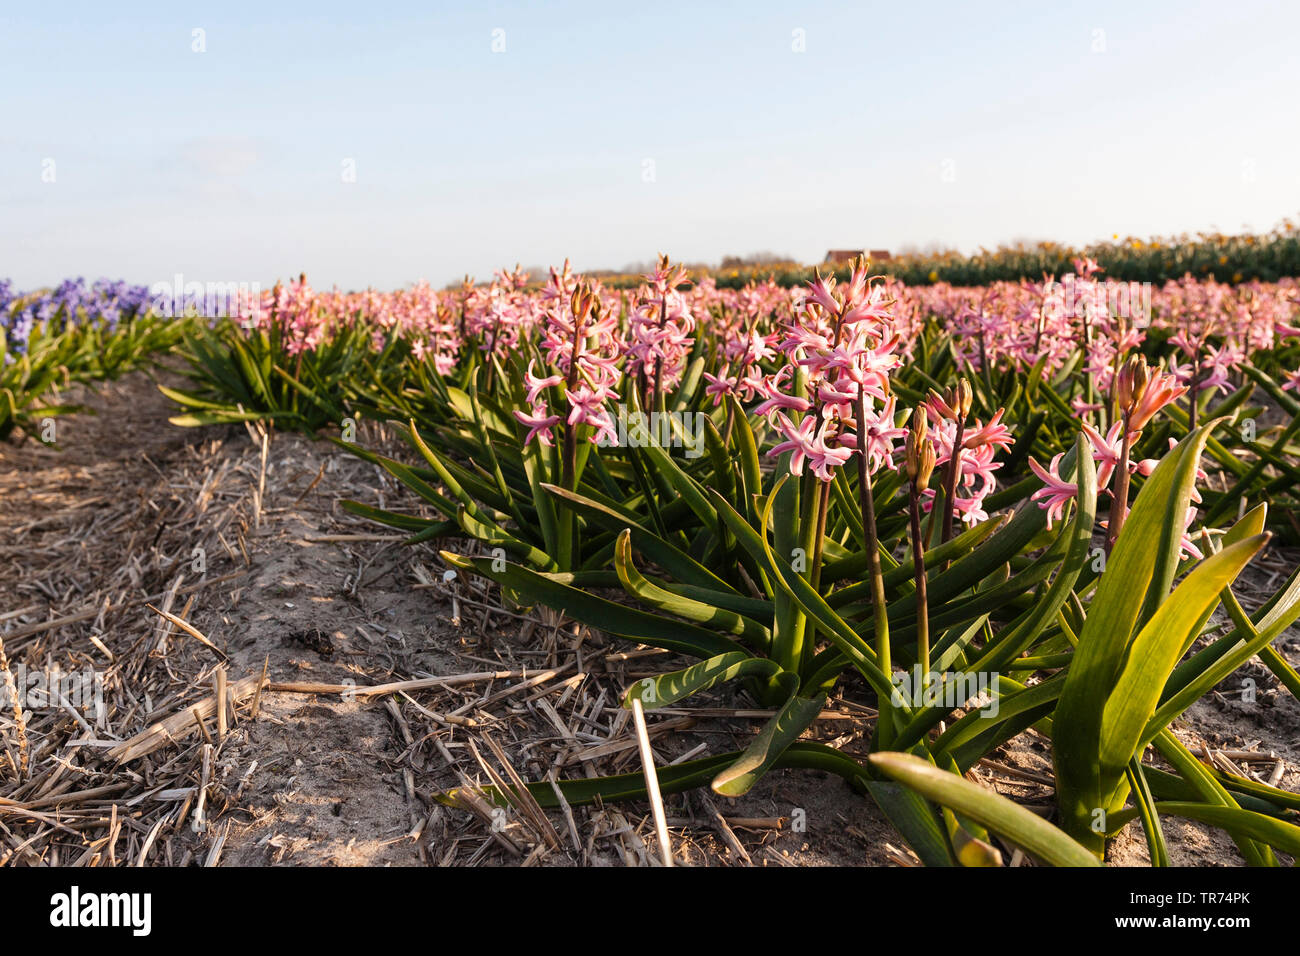 Jacinthe (Hyacinthus orientalis), Bulb Field with different colors of Hyacinths, Netherlands, Northern Netherlands Stock Photo